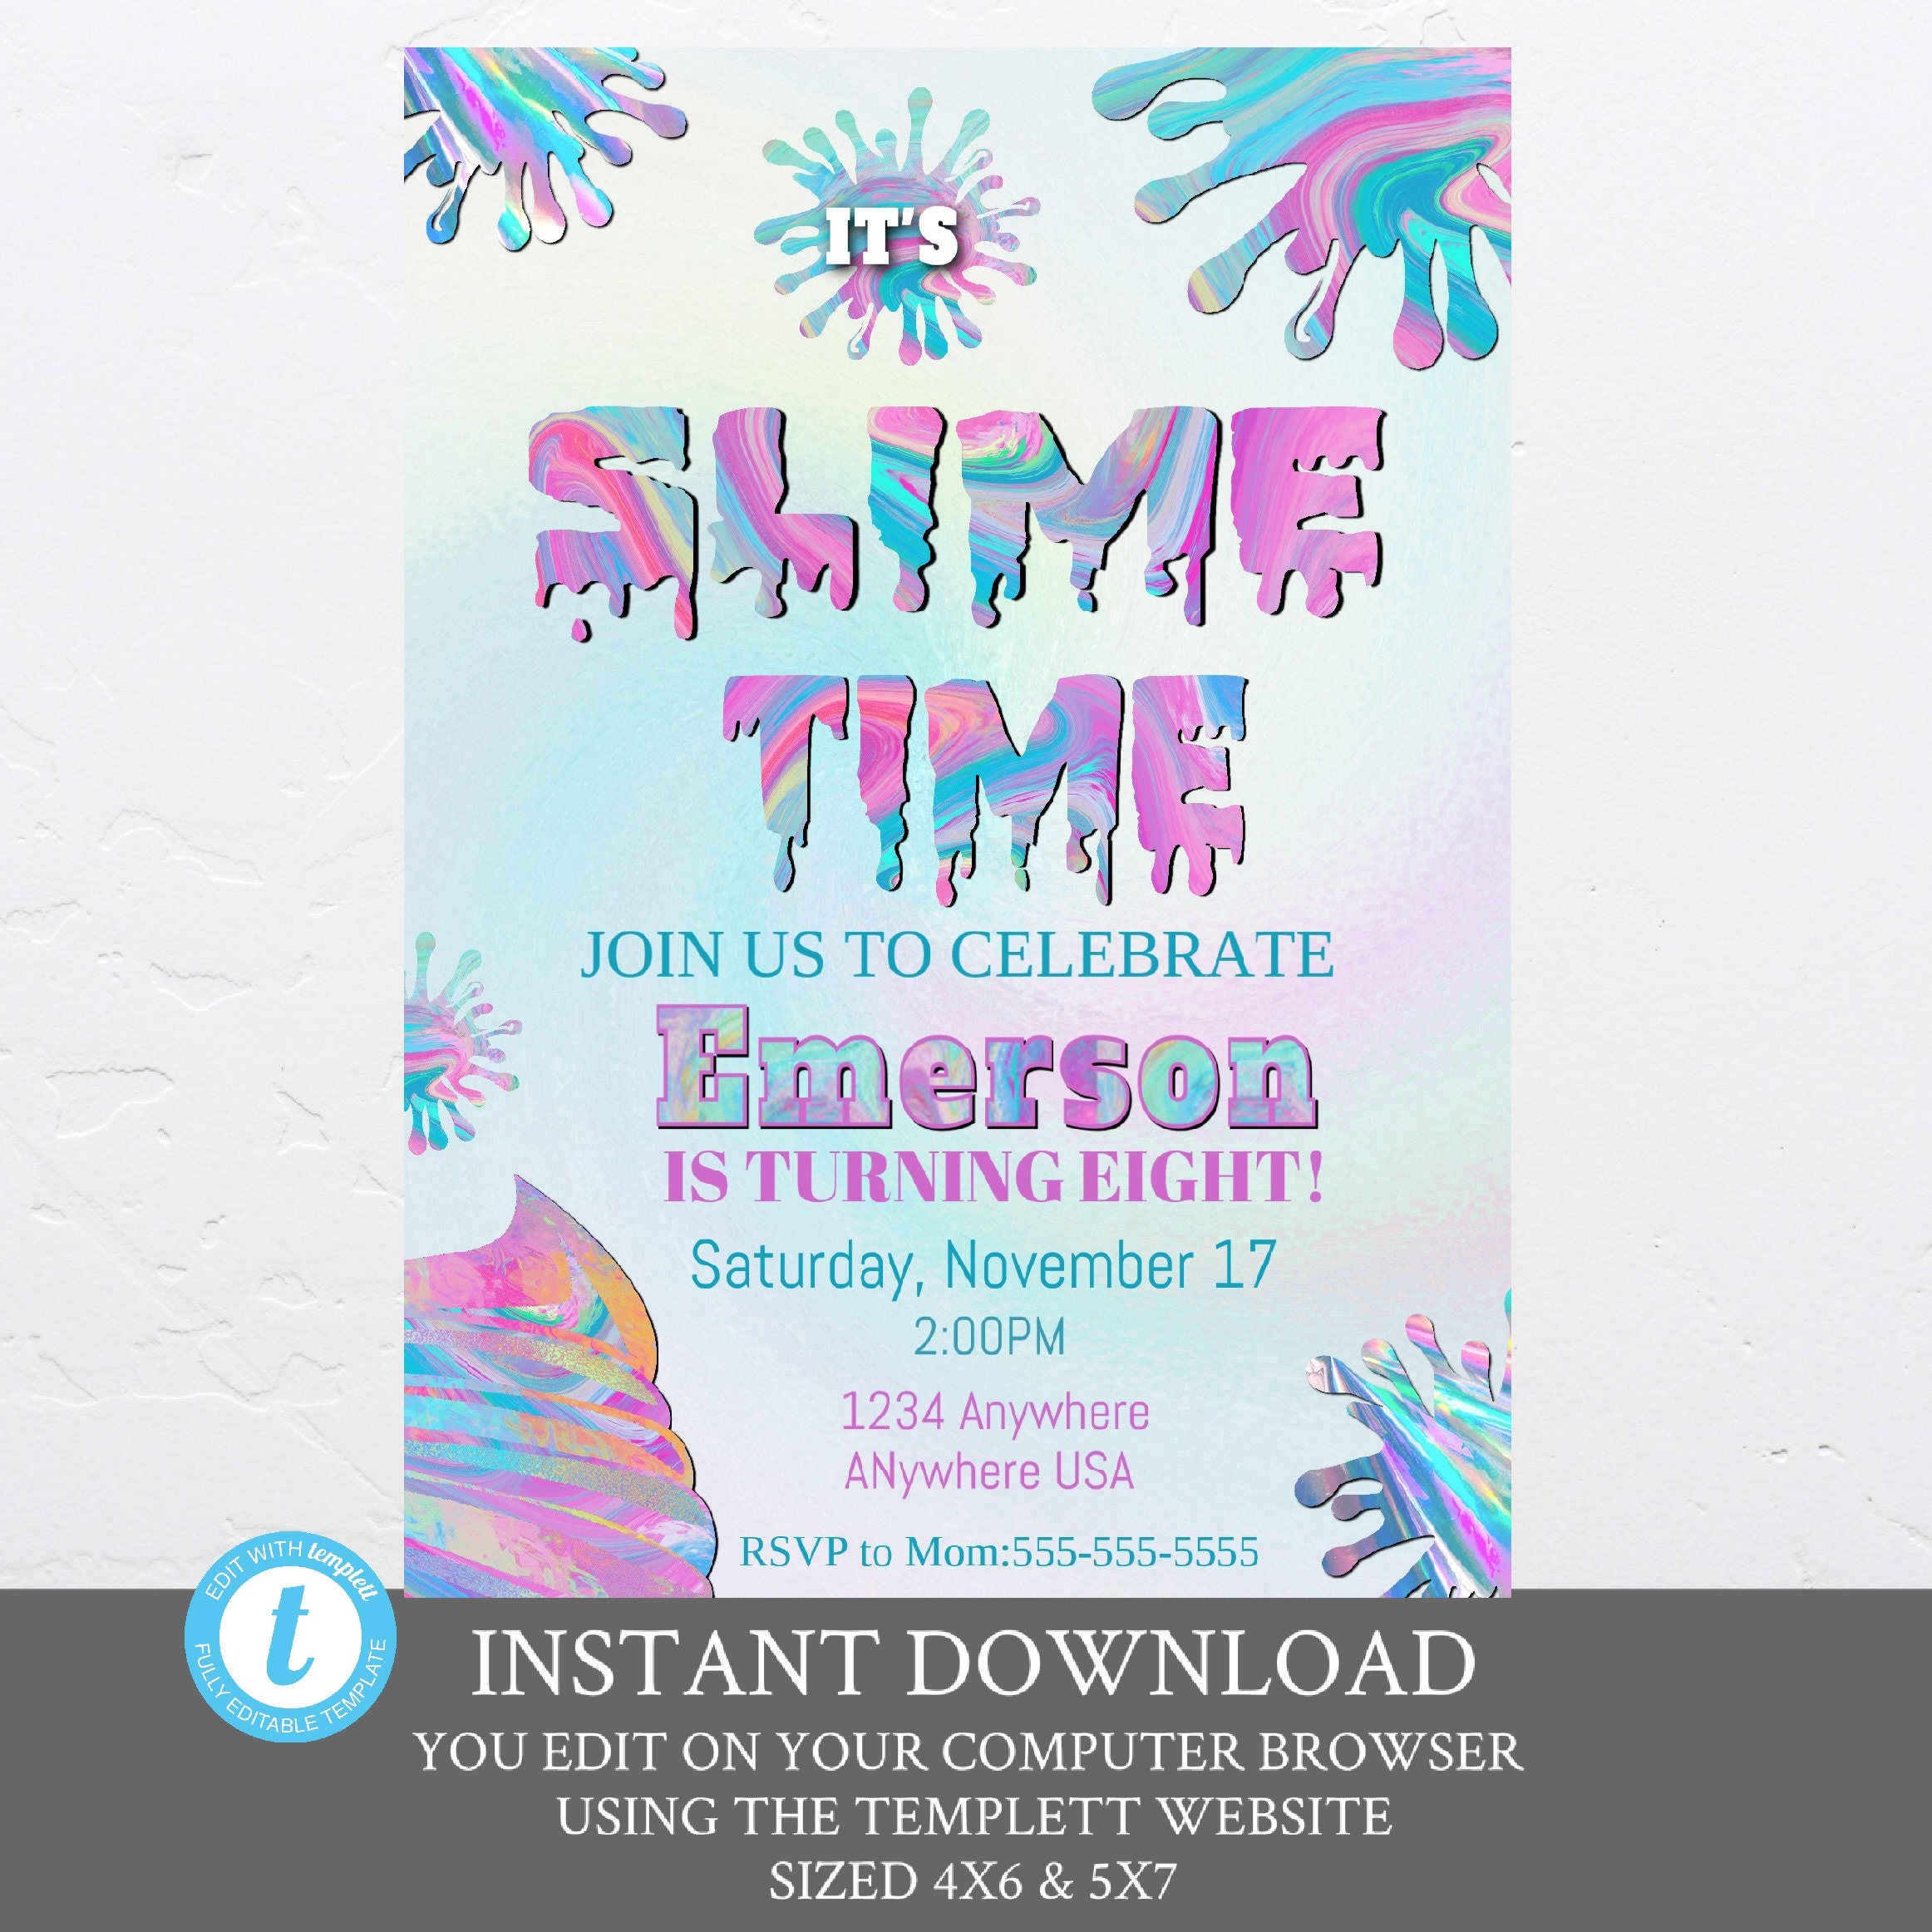 Slime Party Birthday Sign, Mad Scientist Kids Party, Make Your Own